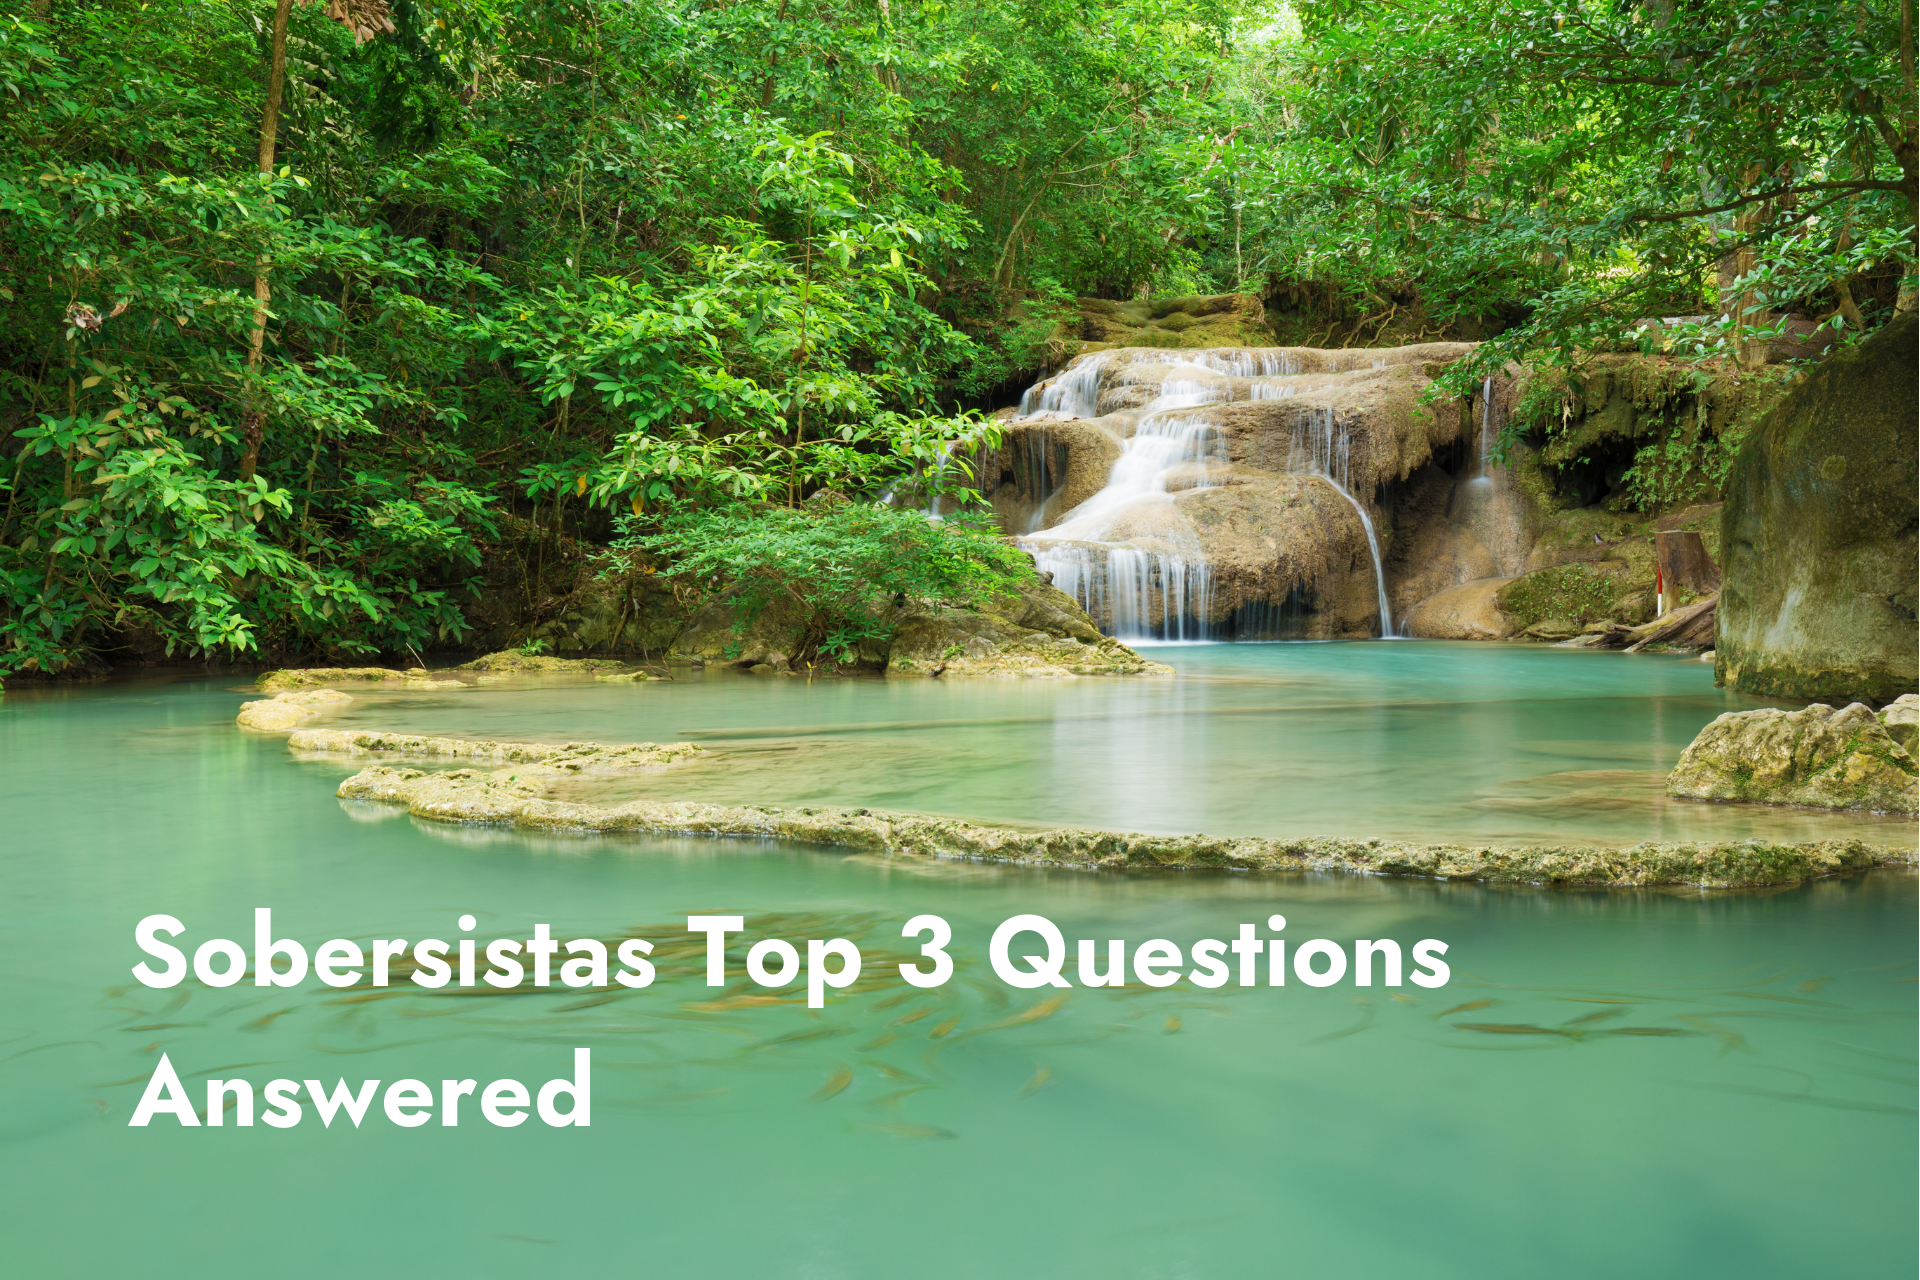 Sobersistas Top 3 Questions Answered